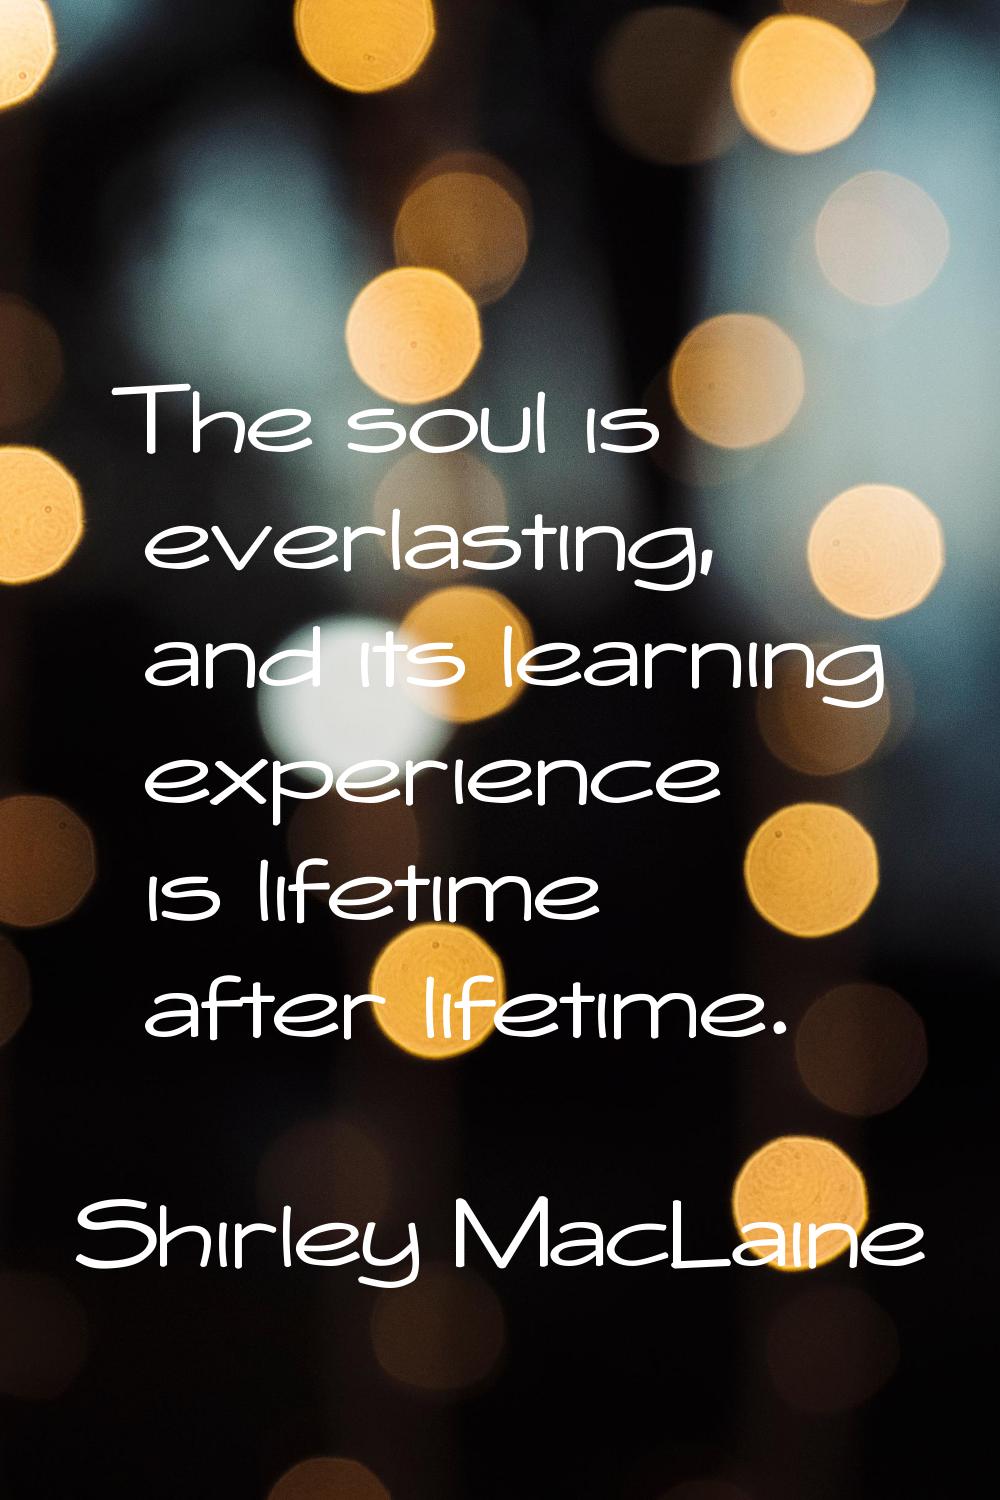 The soul is everlasting, and its learning experience is lifetime after lifetime.